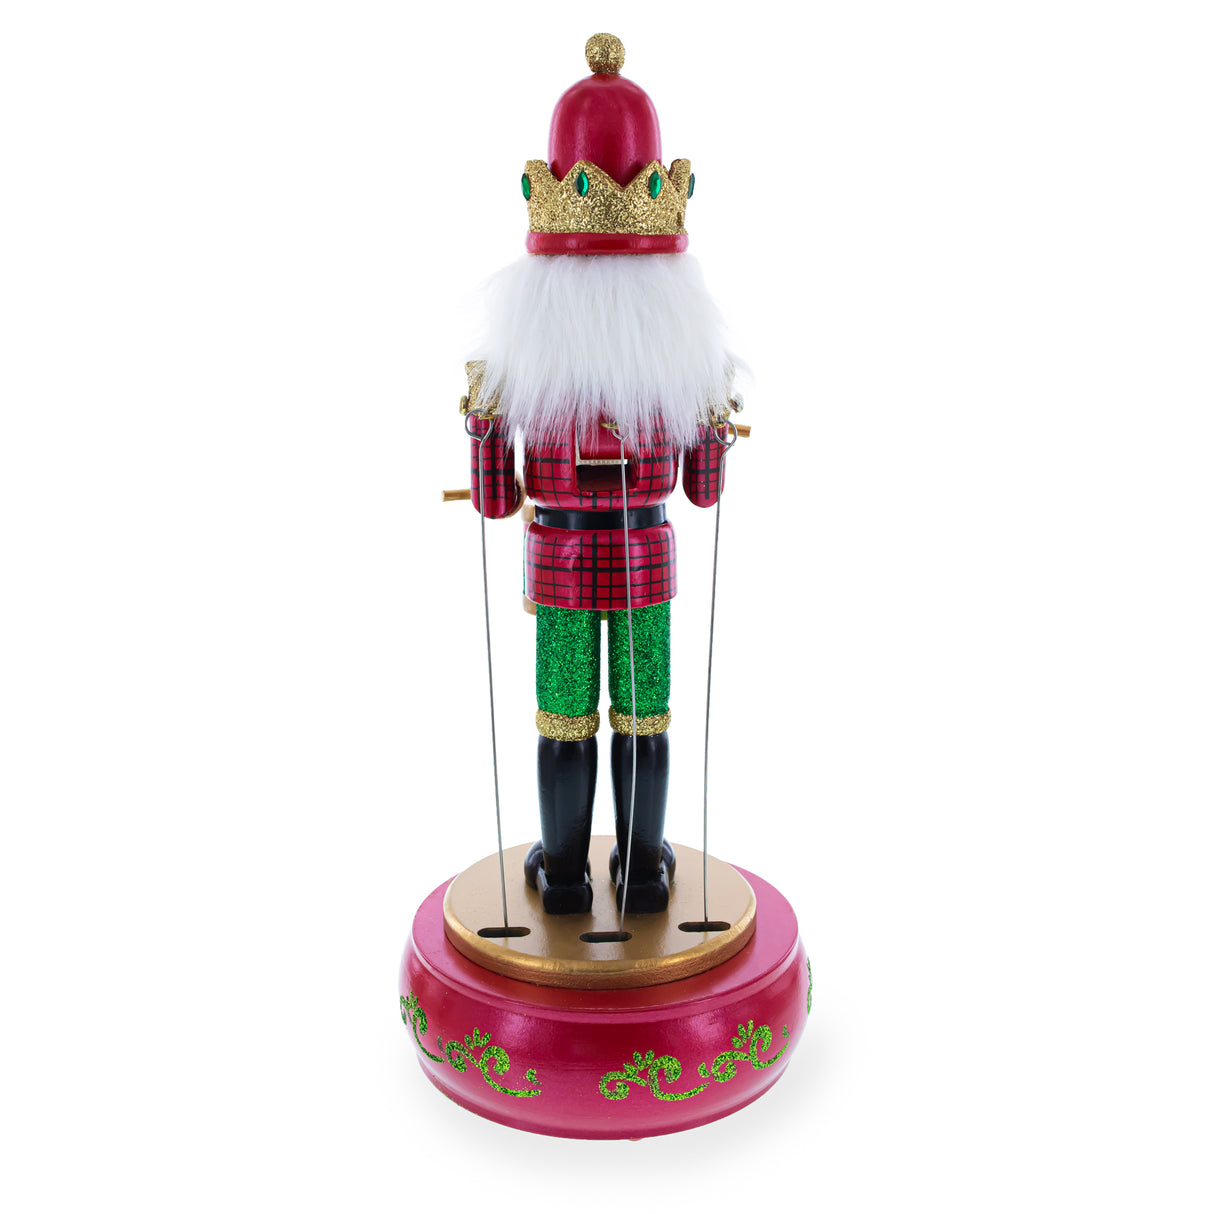 Animated Nutcracker with Moving Arms and Music Box 13 Inches ,dimensions in inches: 13 x 13.6 x 6.4